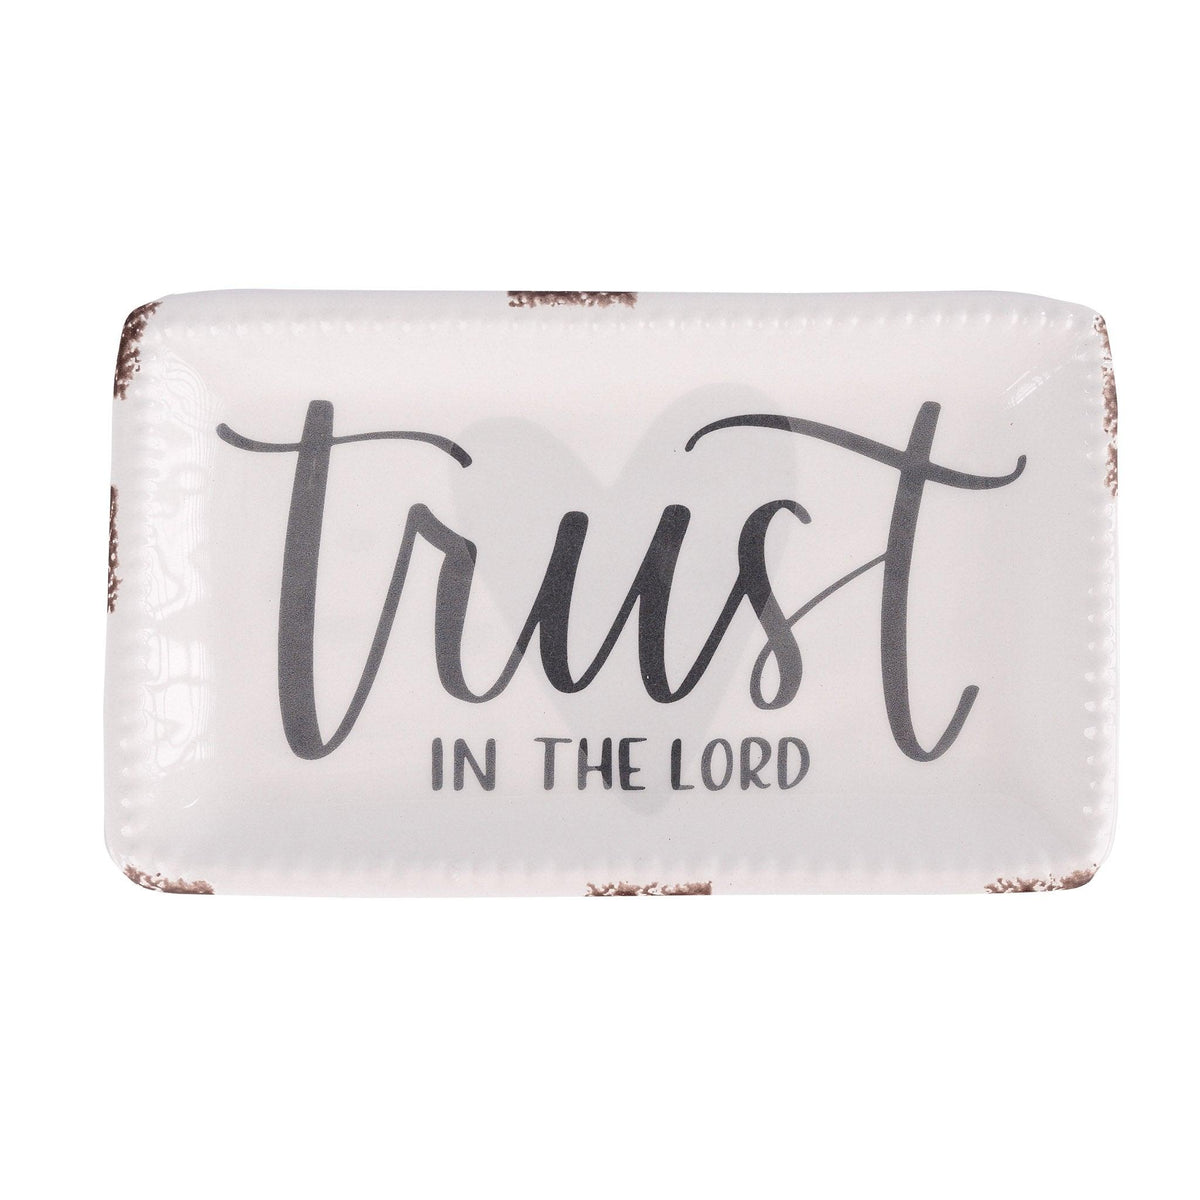 Trust in the Lord Trinket Tray - GLORY HAUS 